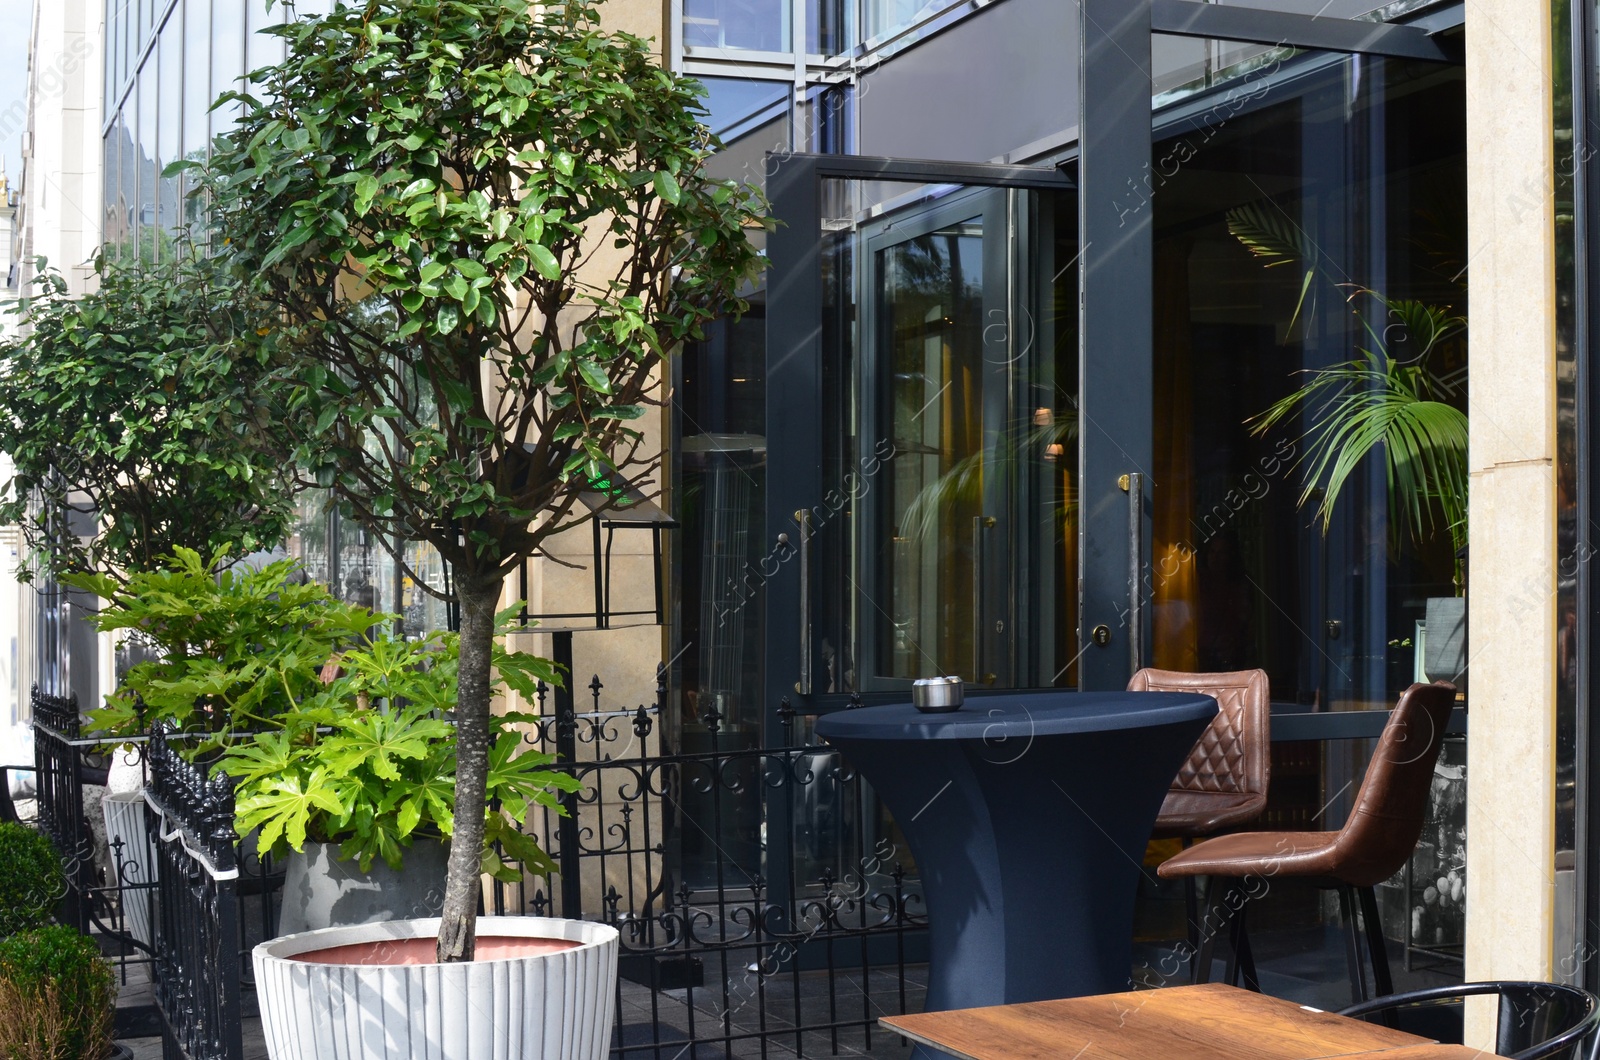 Photo of Entrance of cafe with potted trees, chairs and tables outdoors